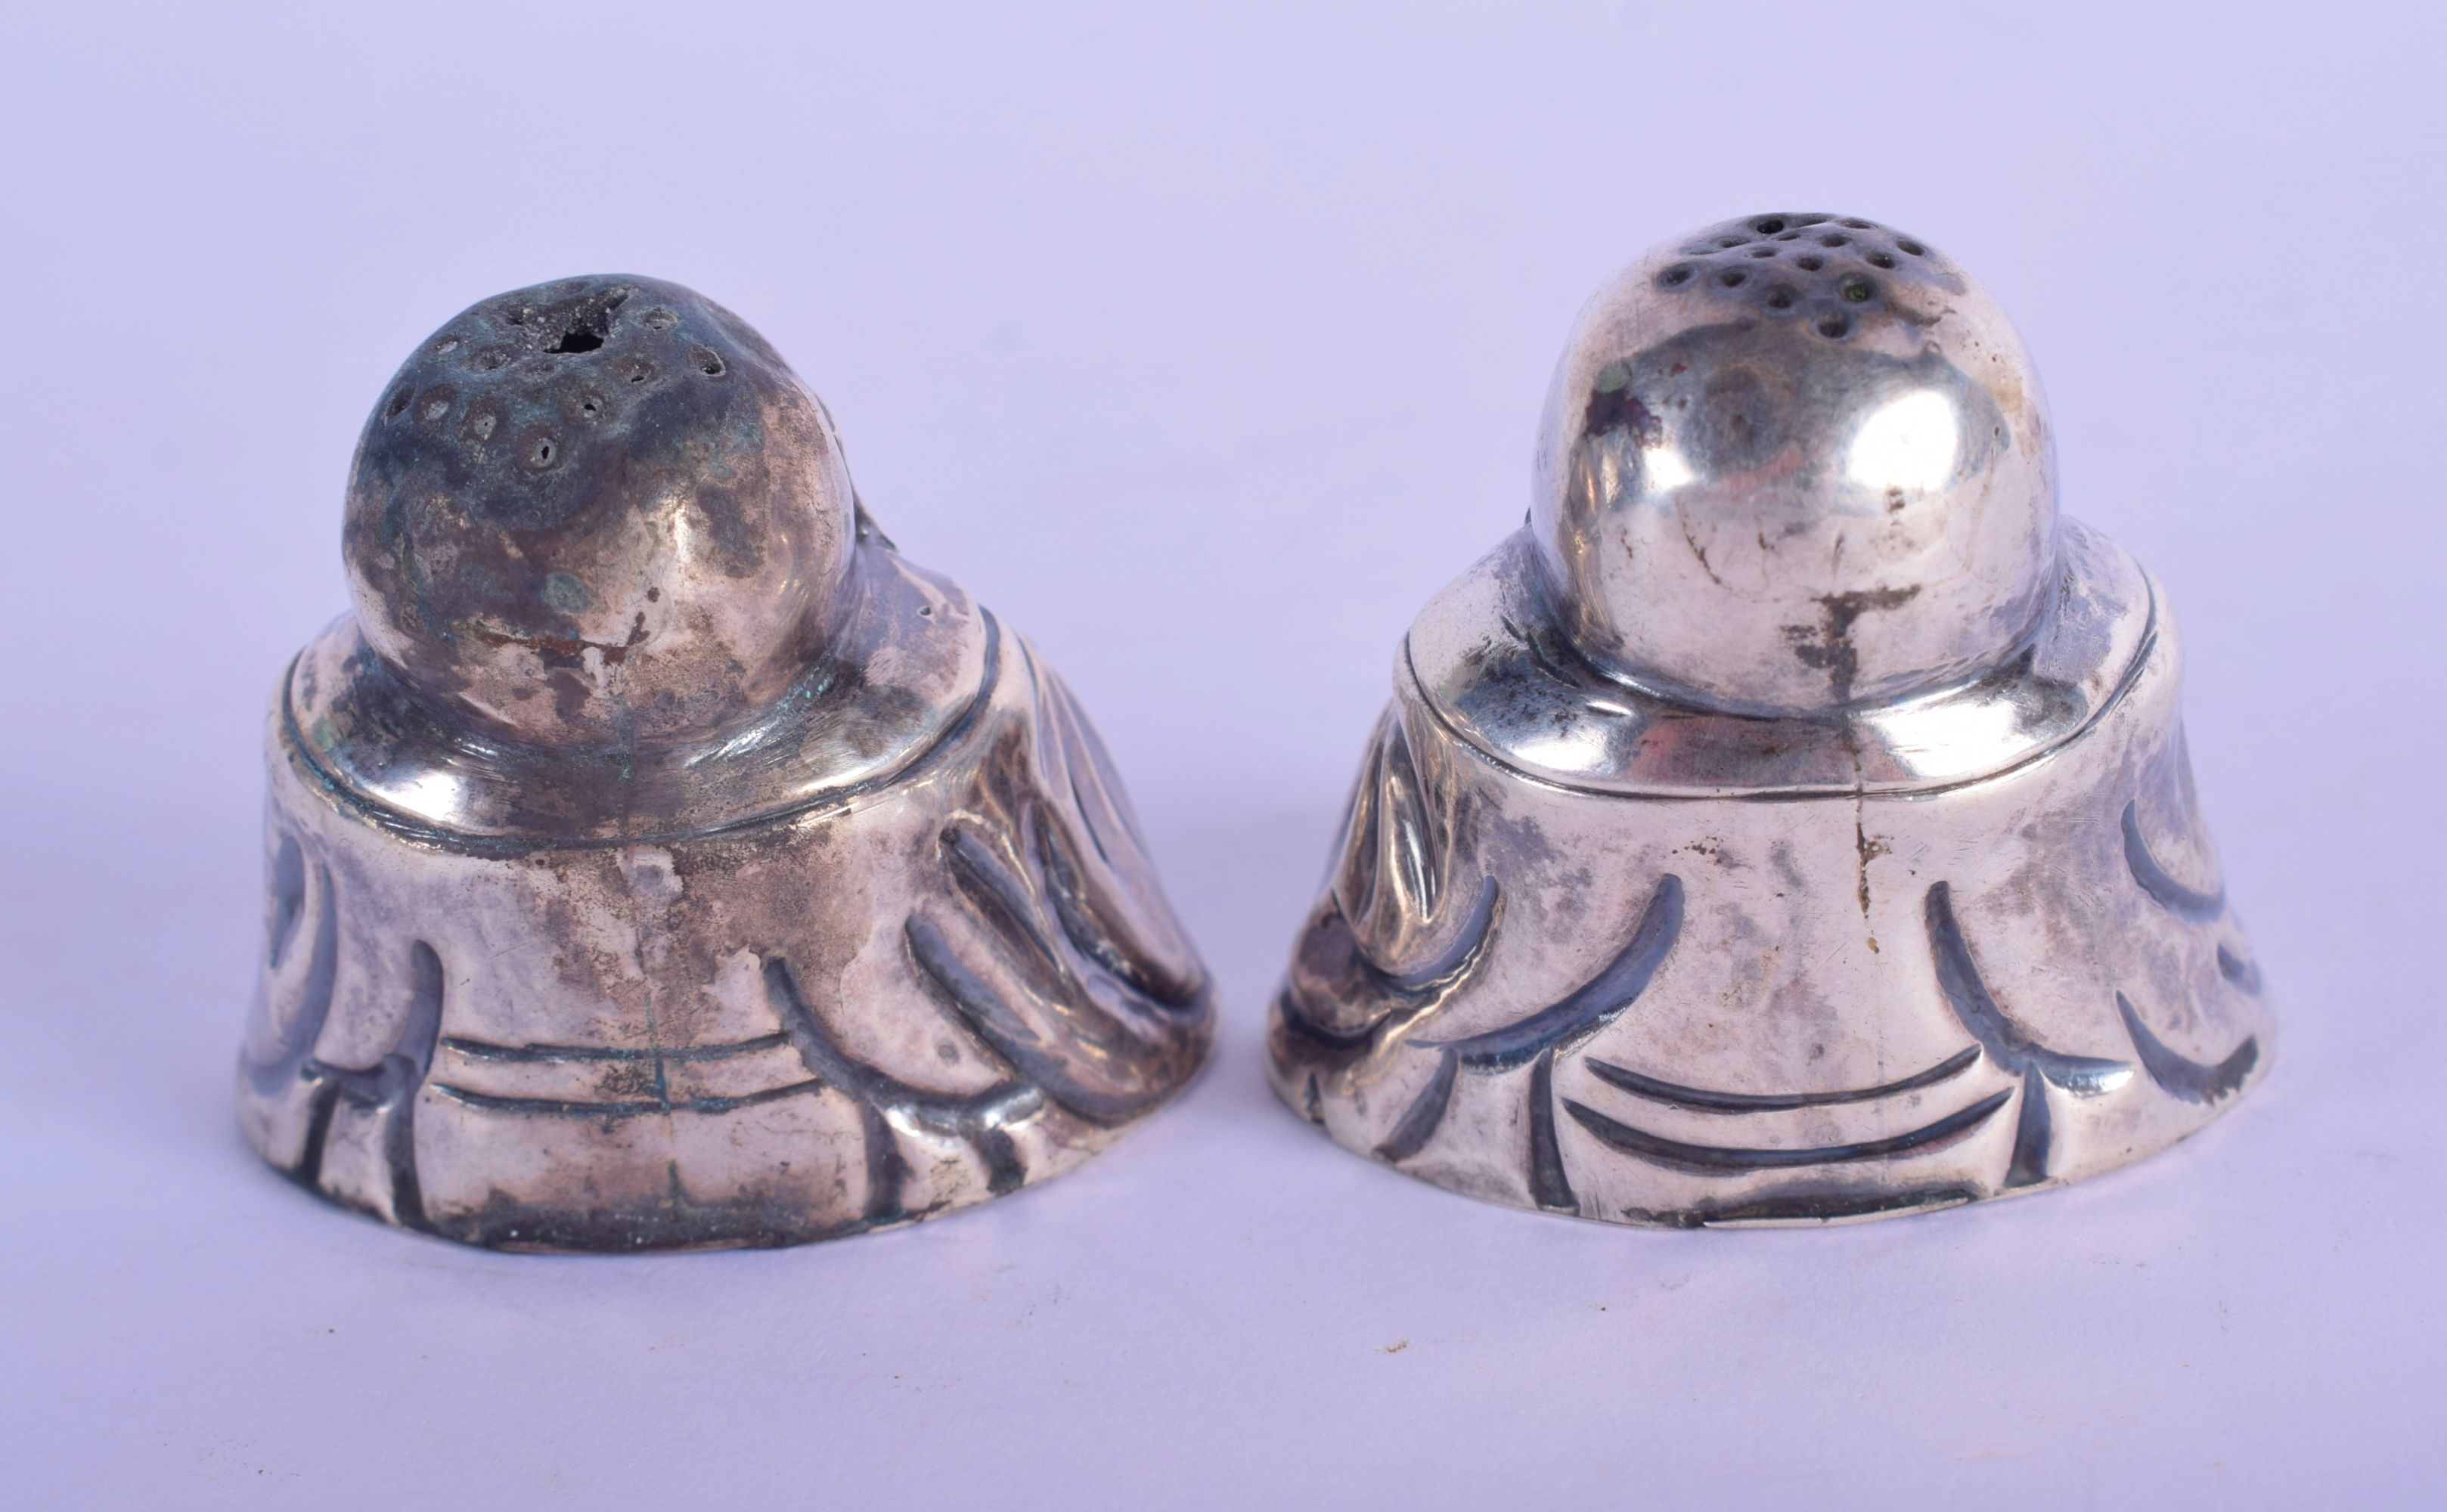 A PAIR OF CHINESE SILVER CONDIMENTS IN THE FORM OF BUDDHA. 4cm x 4.5cm x 2.5cm, weight 43g - Image 2 of 4